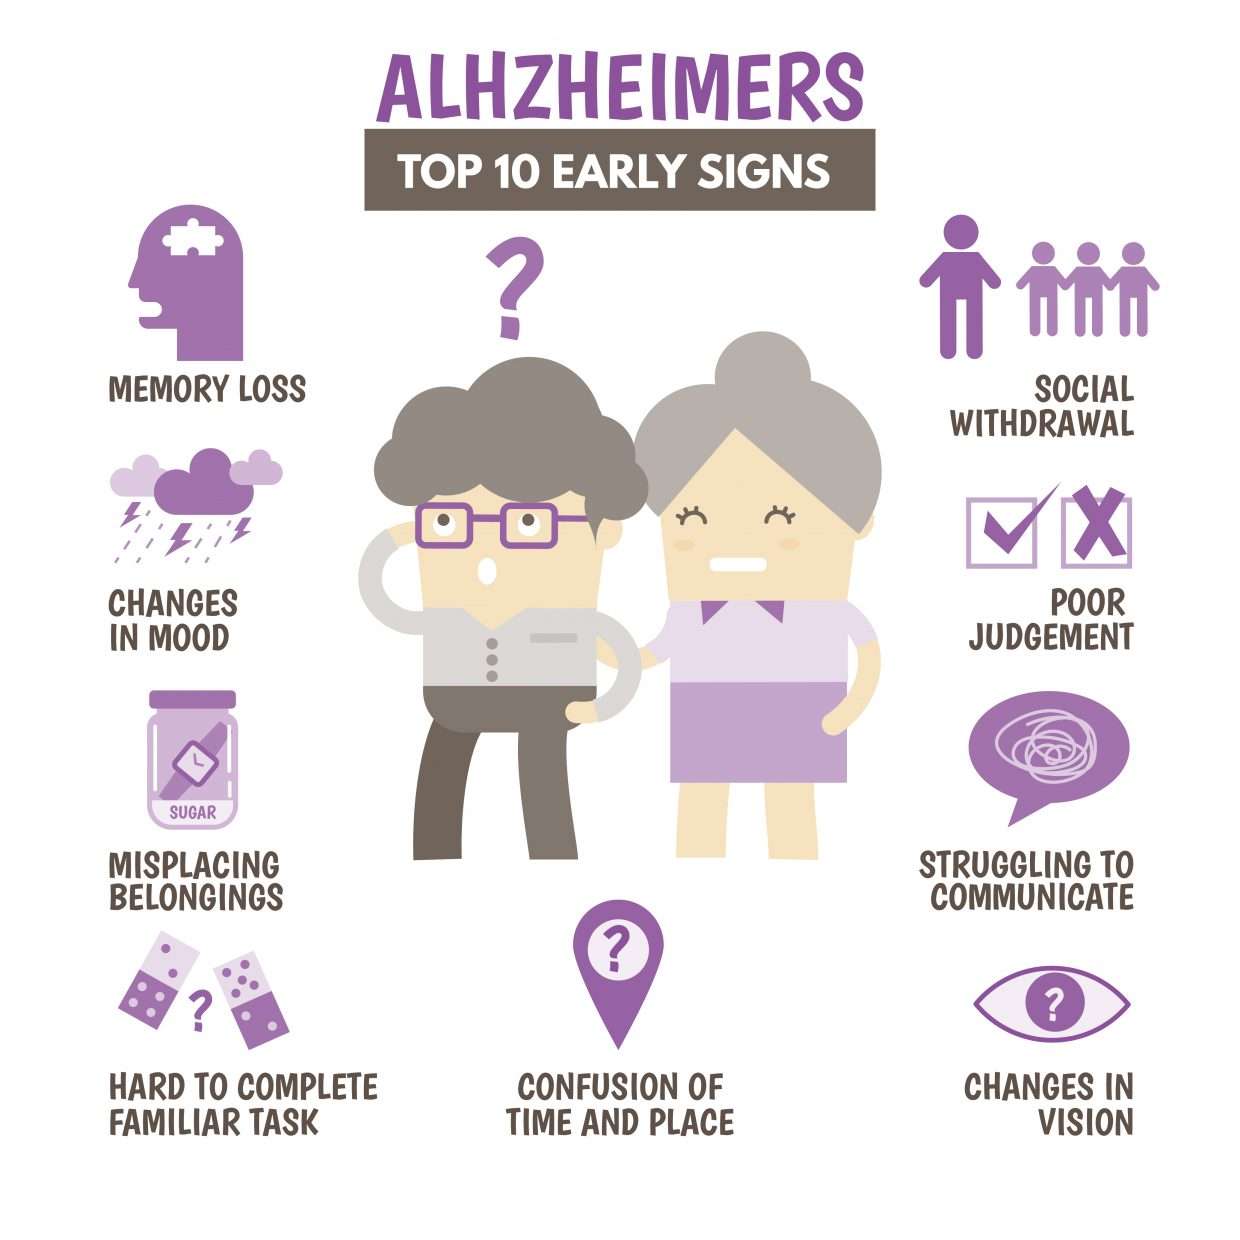 Signs and Symptoms of Alzheimer's